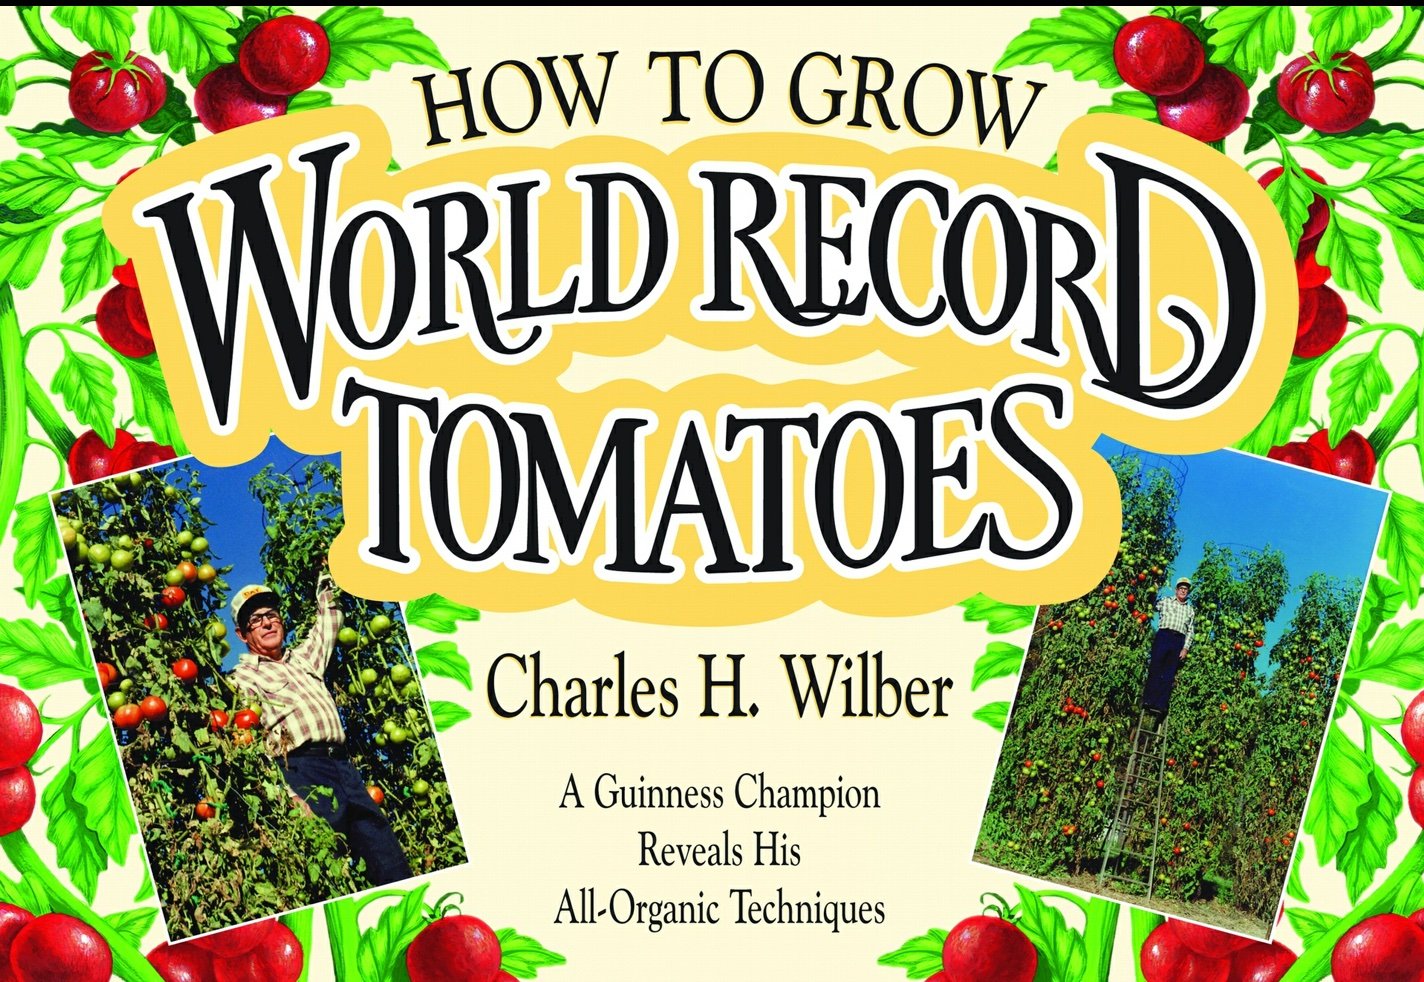 How to grow world record tomatoes_Charles Wilber.jpg